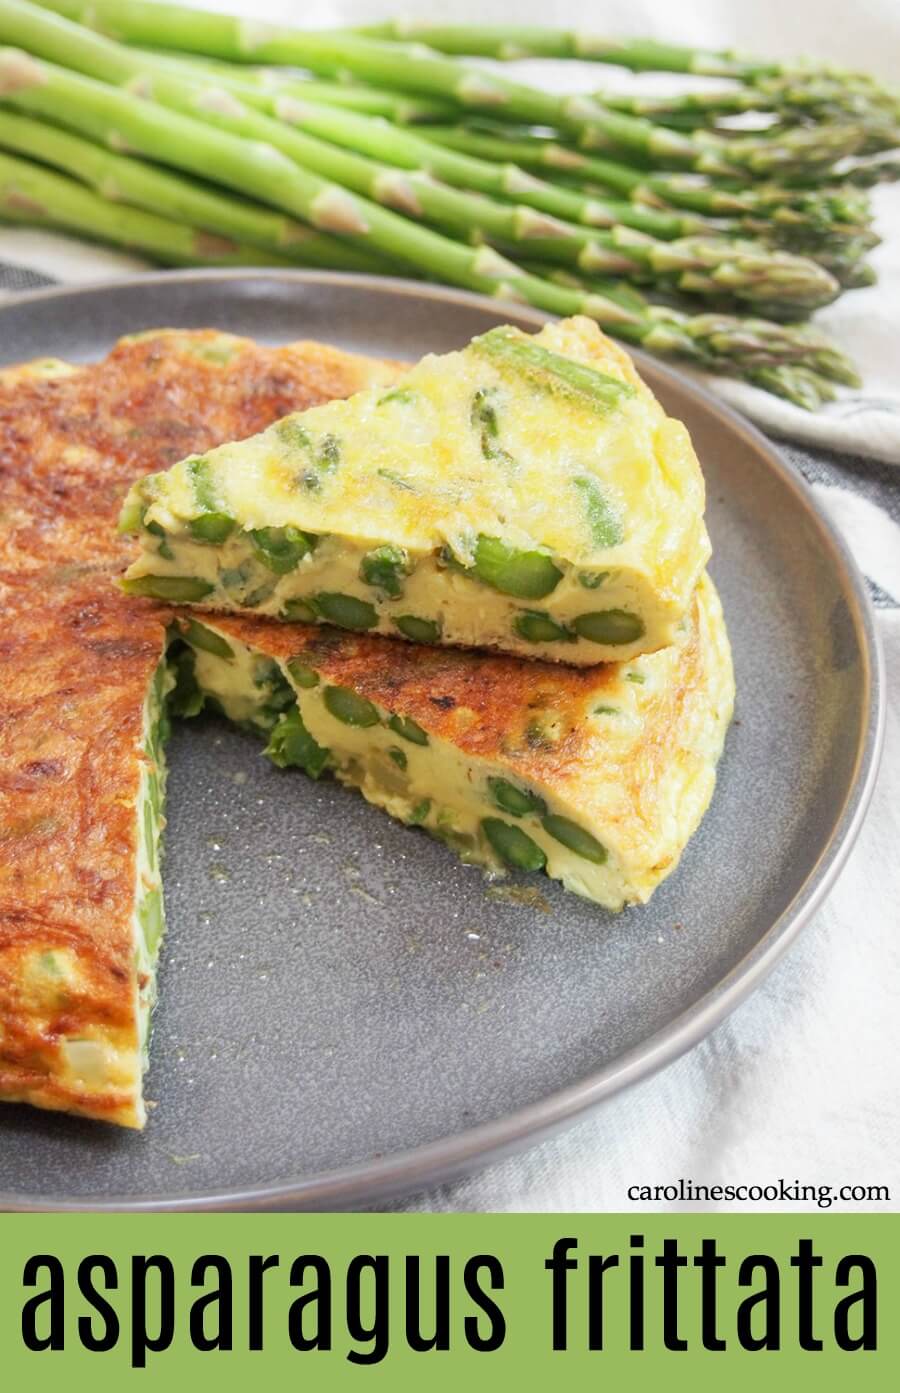 This asparagus frittata is easy to make and the kind of dish that's as good at breakfast as lunch or dinner.  With simple flavors, it's both fresh and comforting - plus easy to adapt too!  Serve as it is, with salad, or as a side along side other hands.  #frittata #asparagus #vegetarian